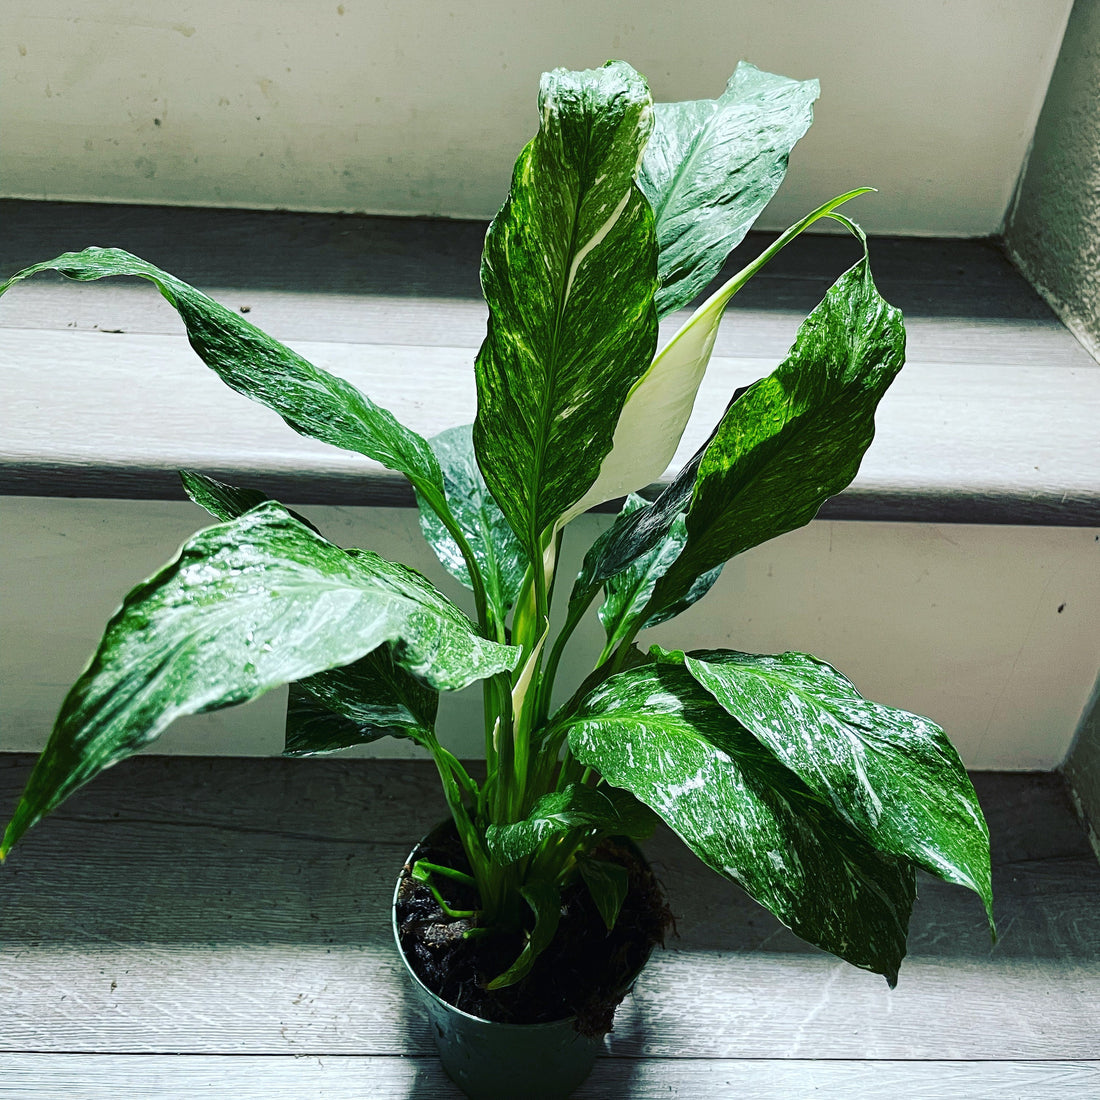 Variegated Spathiphyllum Peace Lily Domino - Live Indoor air purifying plant 4 inch pot